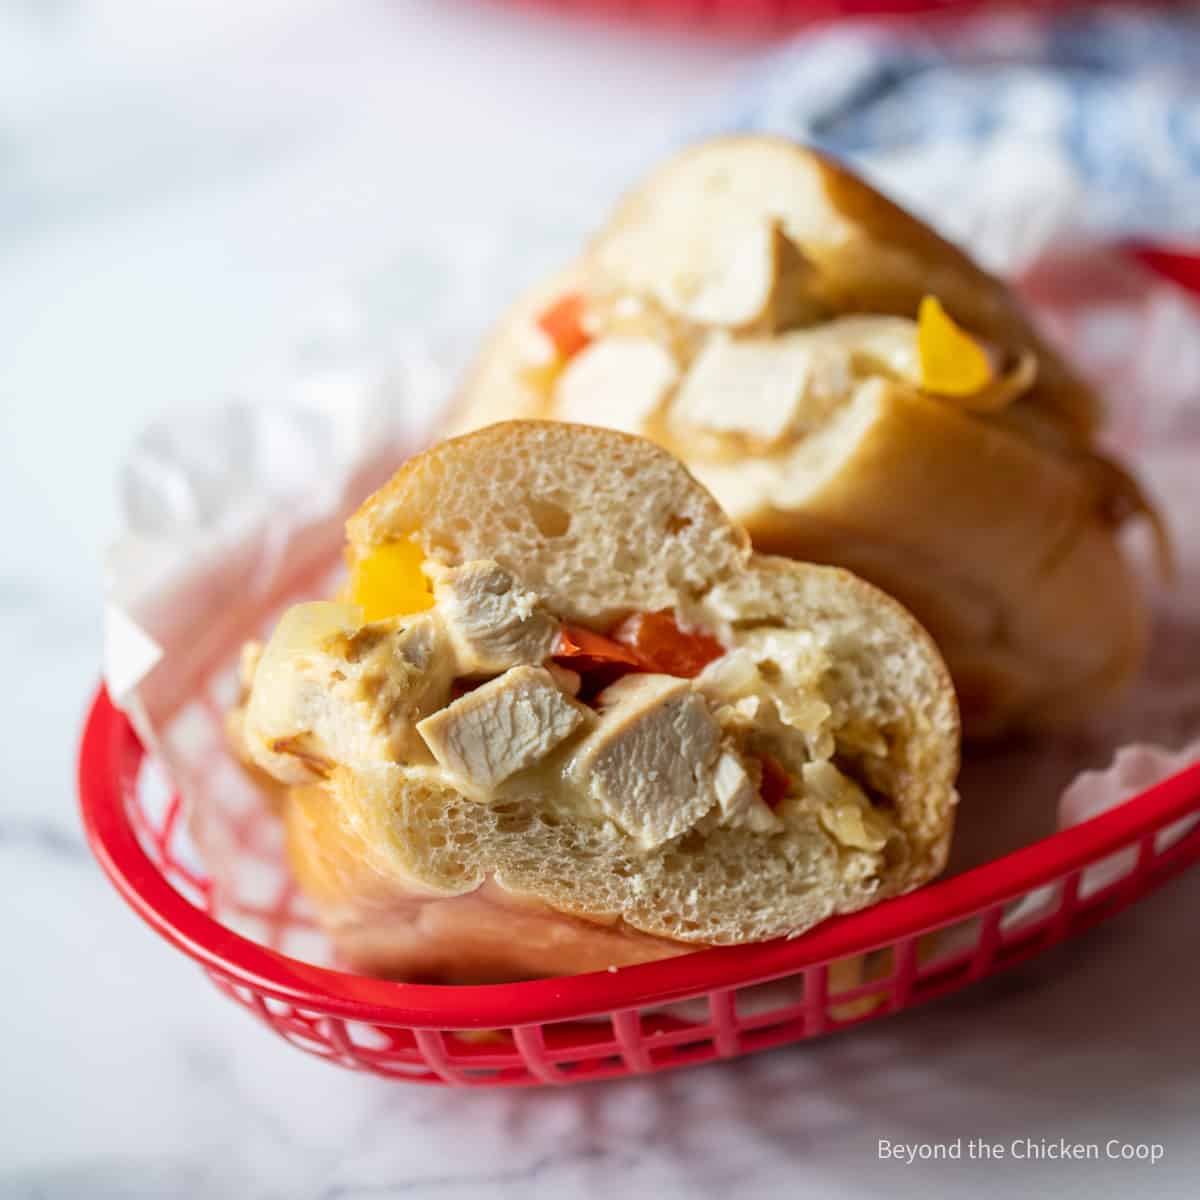 A chicken sandwich with peppers and onions.